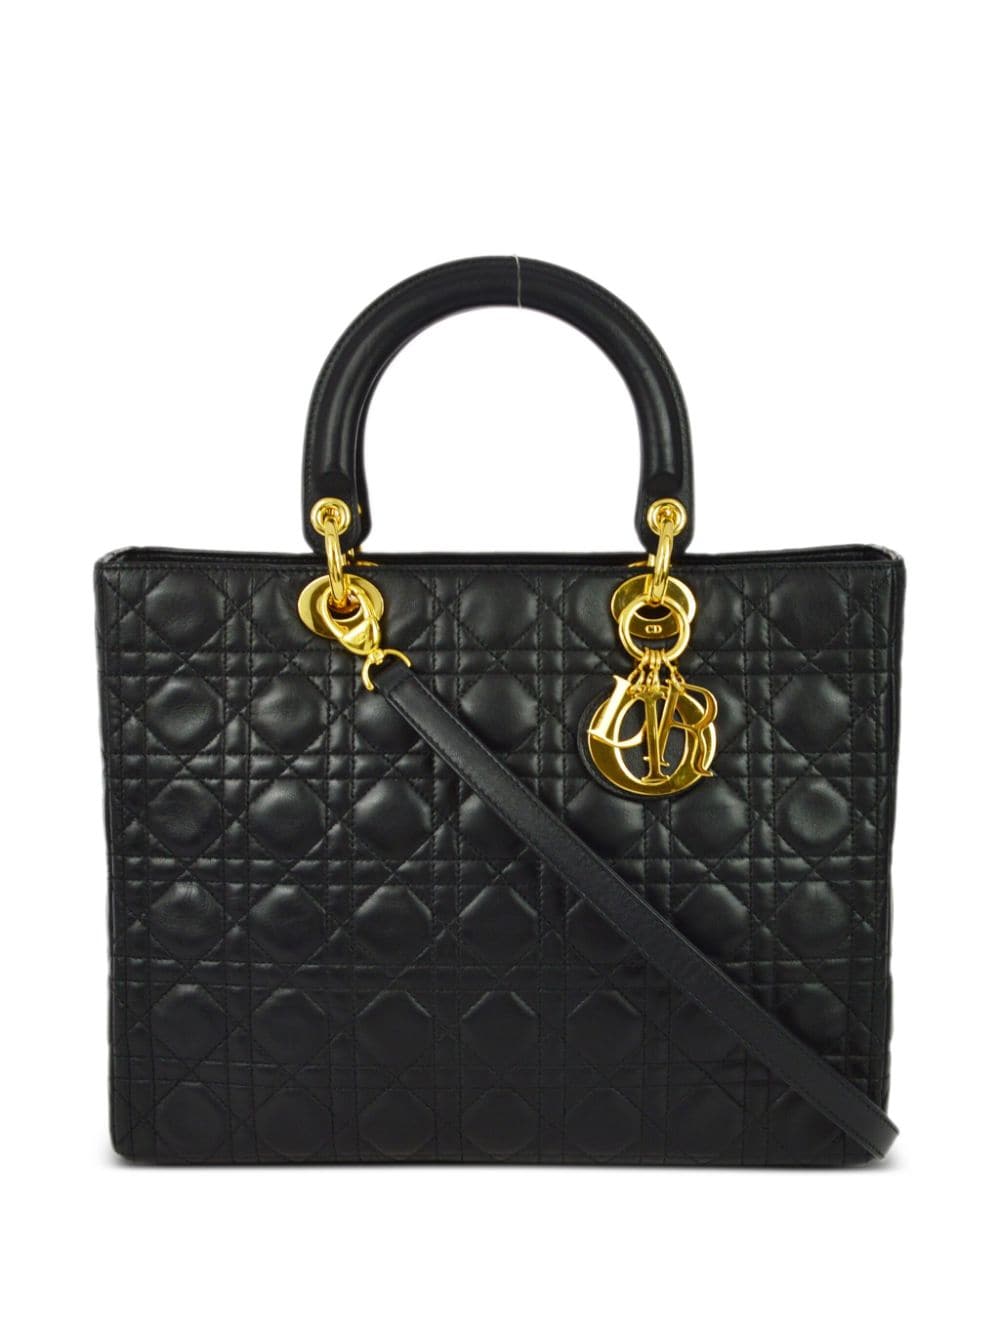 Christian Dior Pre-Owned 1997 Lady Dior two-way handbag - Black von Christian Dior Pre-Owned